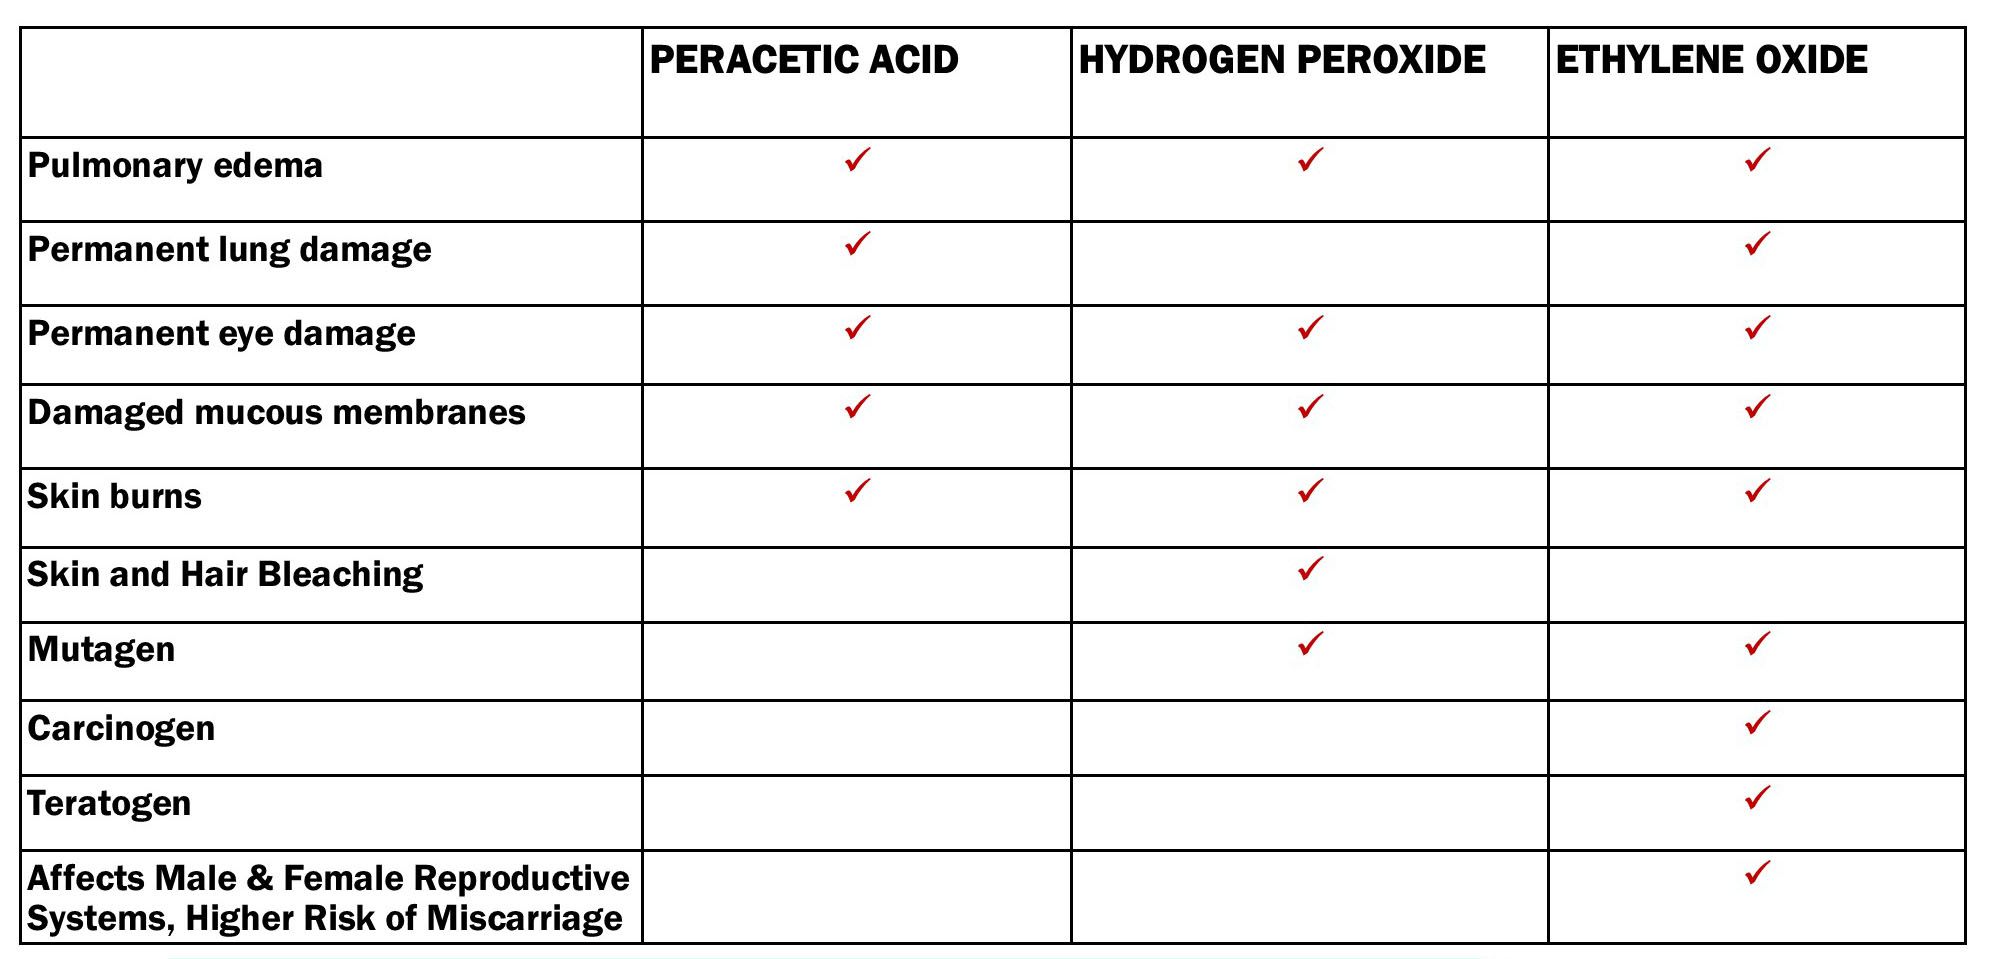 ChemDAQ chart of the health dangers to Peracetic Acid, Hydrogen Peroxide and Ethylene Oxide